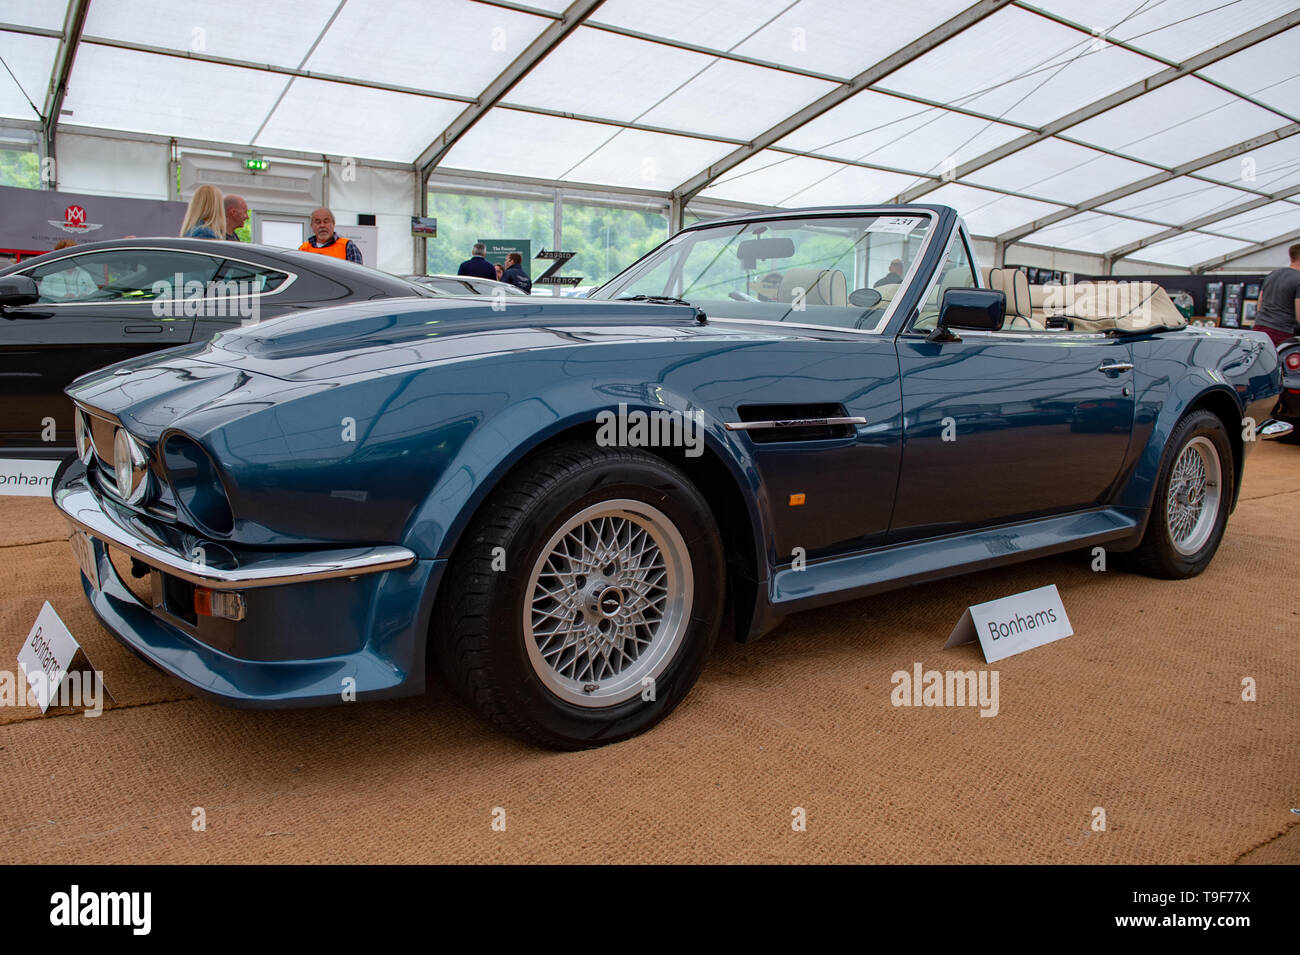 High Wycombe, United Kingdom. 18 May 2019. Bonhams put Aston Martin and Lagonda cars and related automobilia under the hammer at The Wormsley Estate in Buckinghamshire. PICTURED: 1987 Aston Martin V8 Vantage 'X-Pack' Volante. Credit: Peter Manning/Alamy Live News Stock Photo